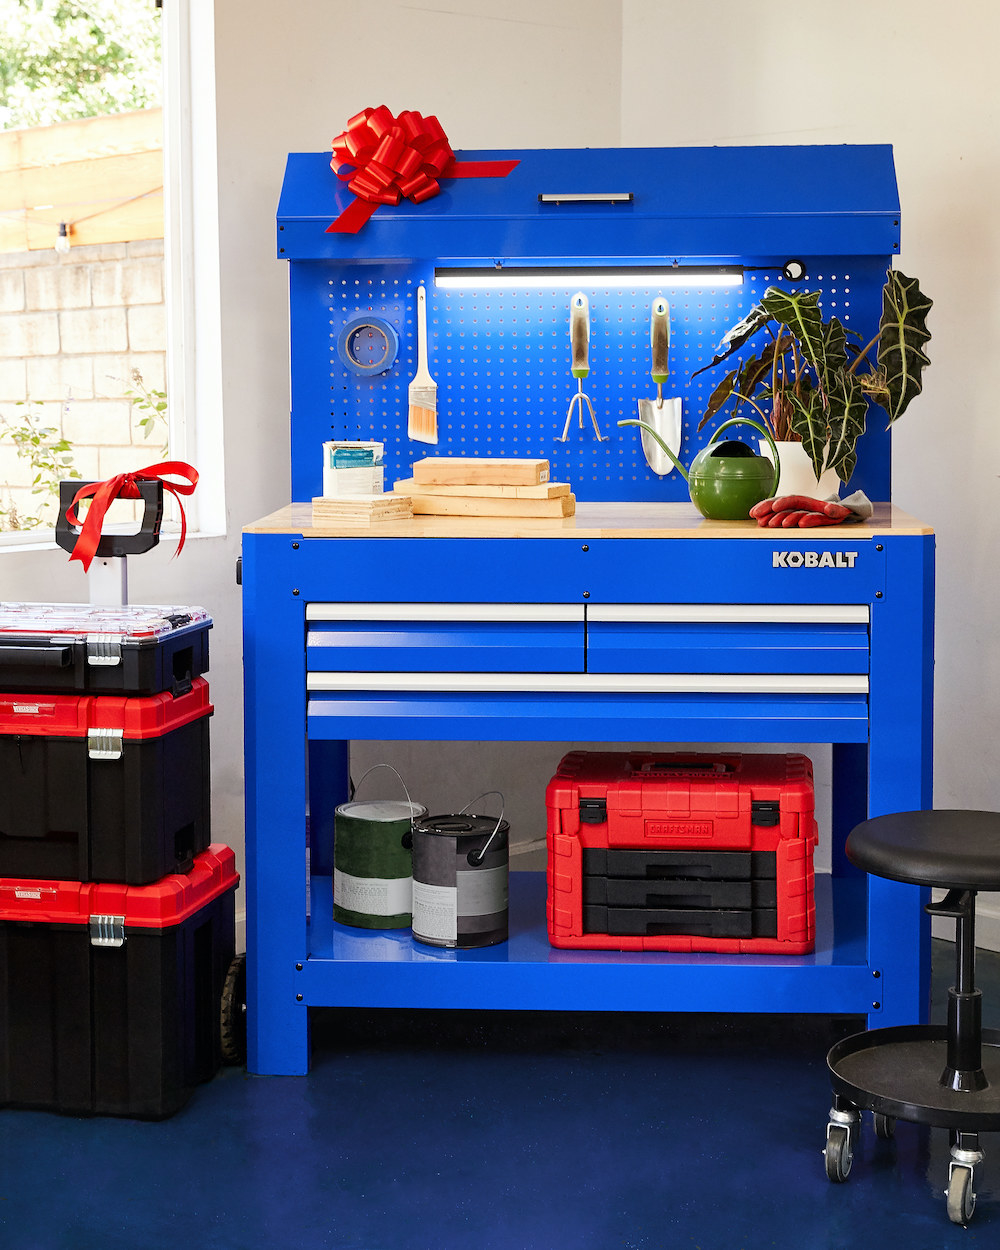 A photo of the Kobalt 45-inch x 36-inch 3-Drawer Hardwood Work Bench with gardening and home supplies.